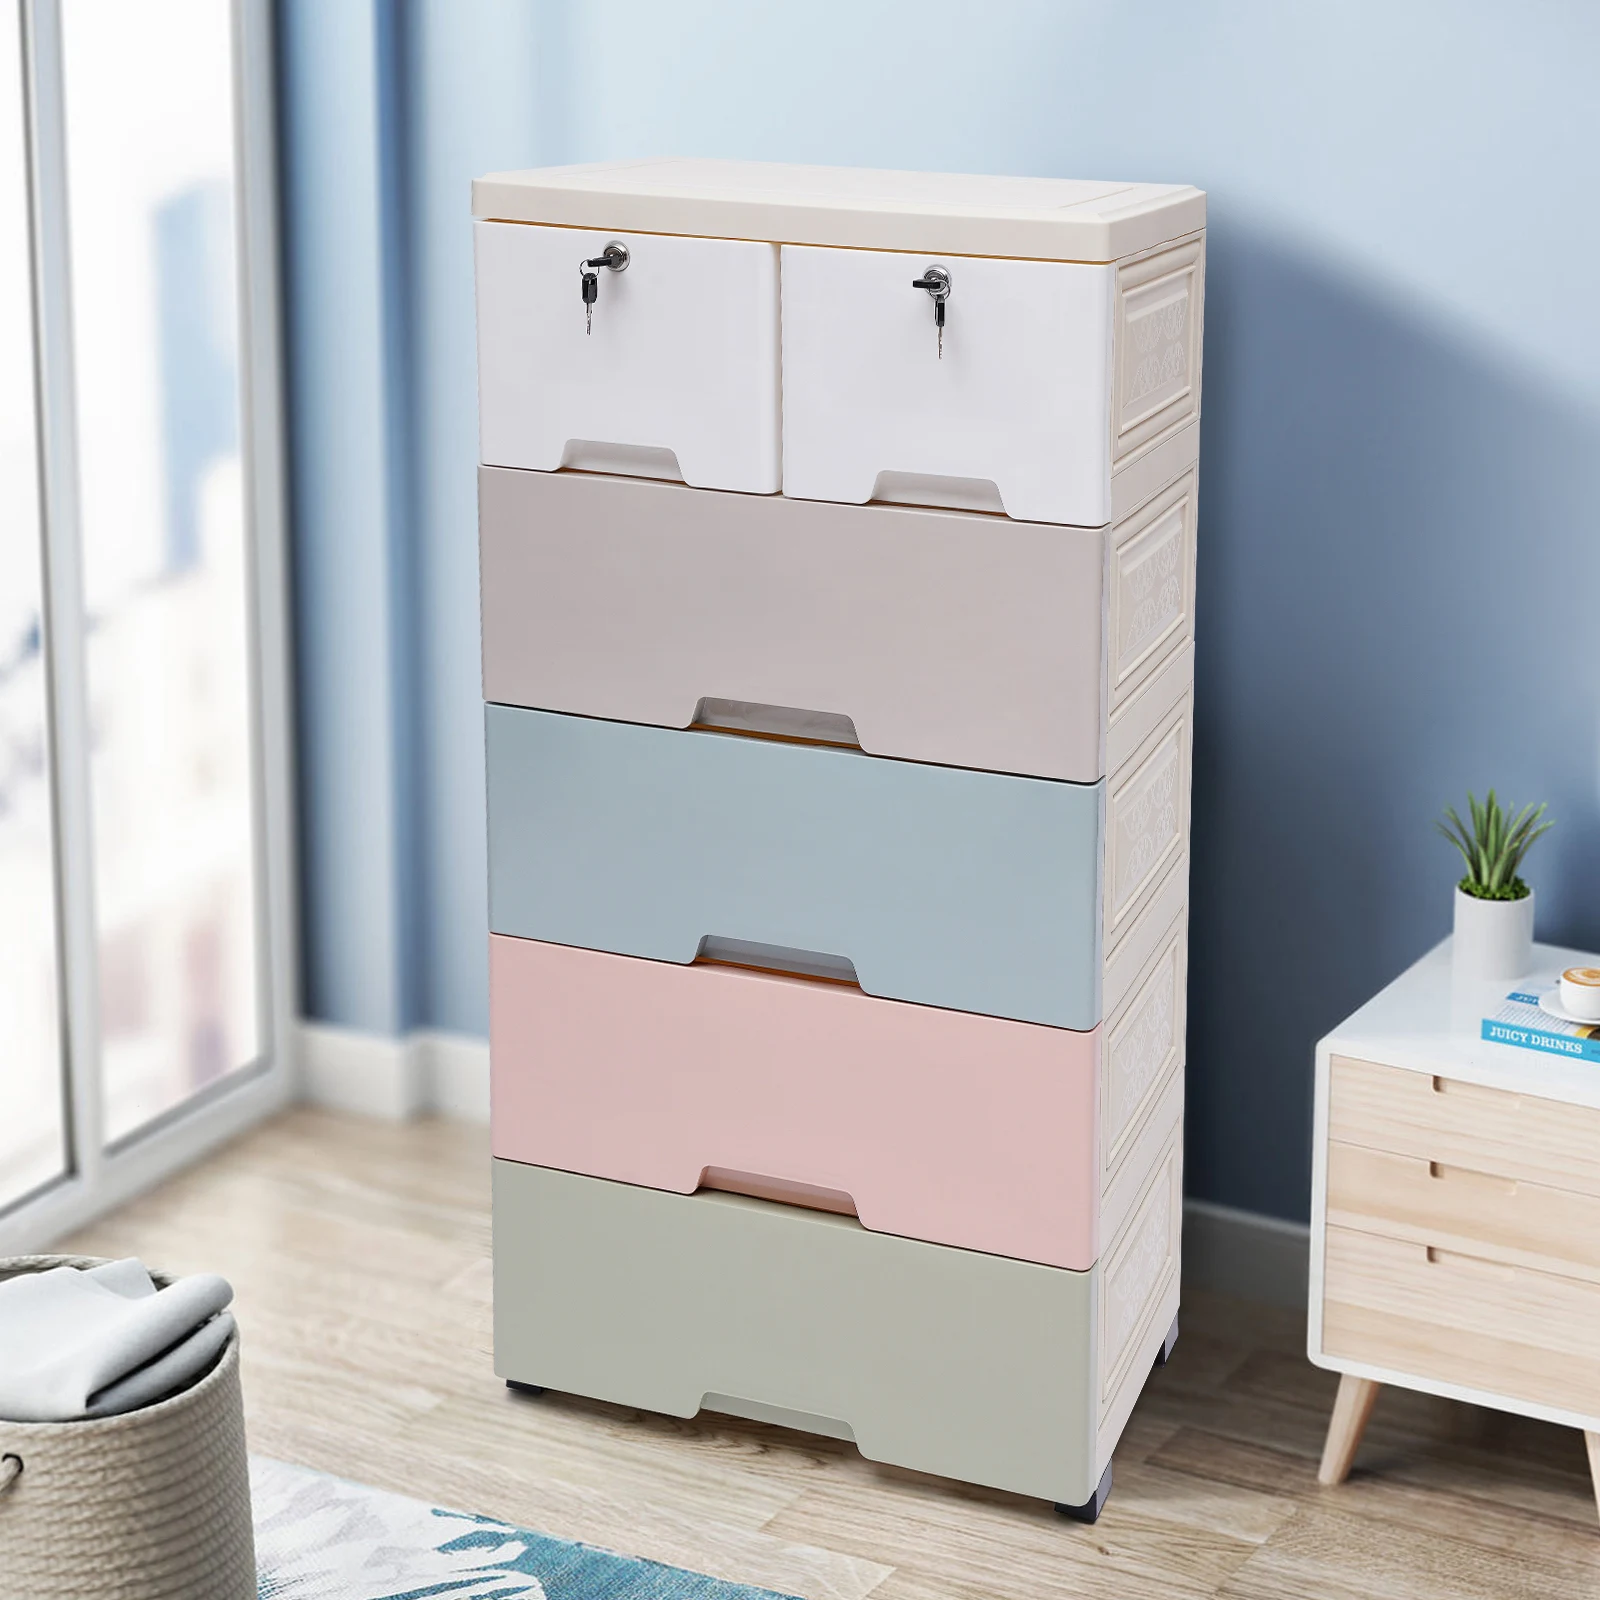 

5 Layer Storage Cabinet with 6 Drawers Closet Drawers Tall Dresser Organizer for Clothes Playroom Bedroom Furniture Saving Space